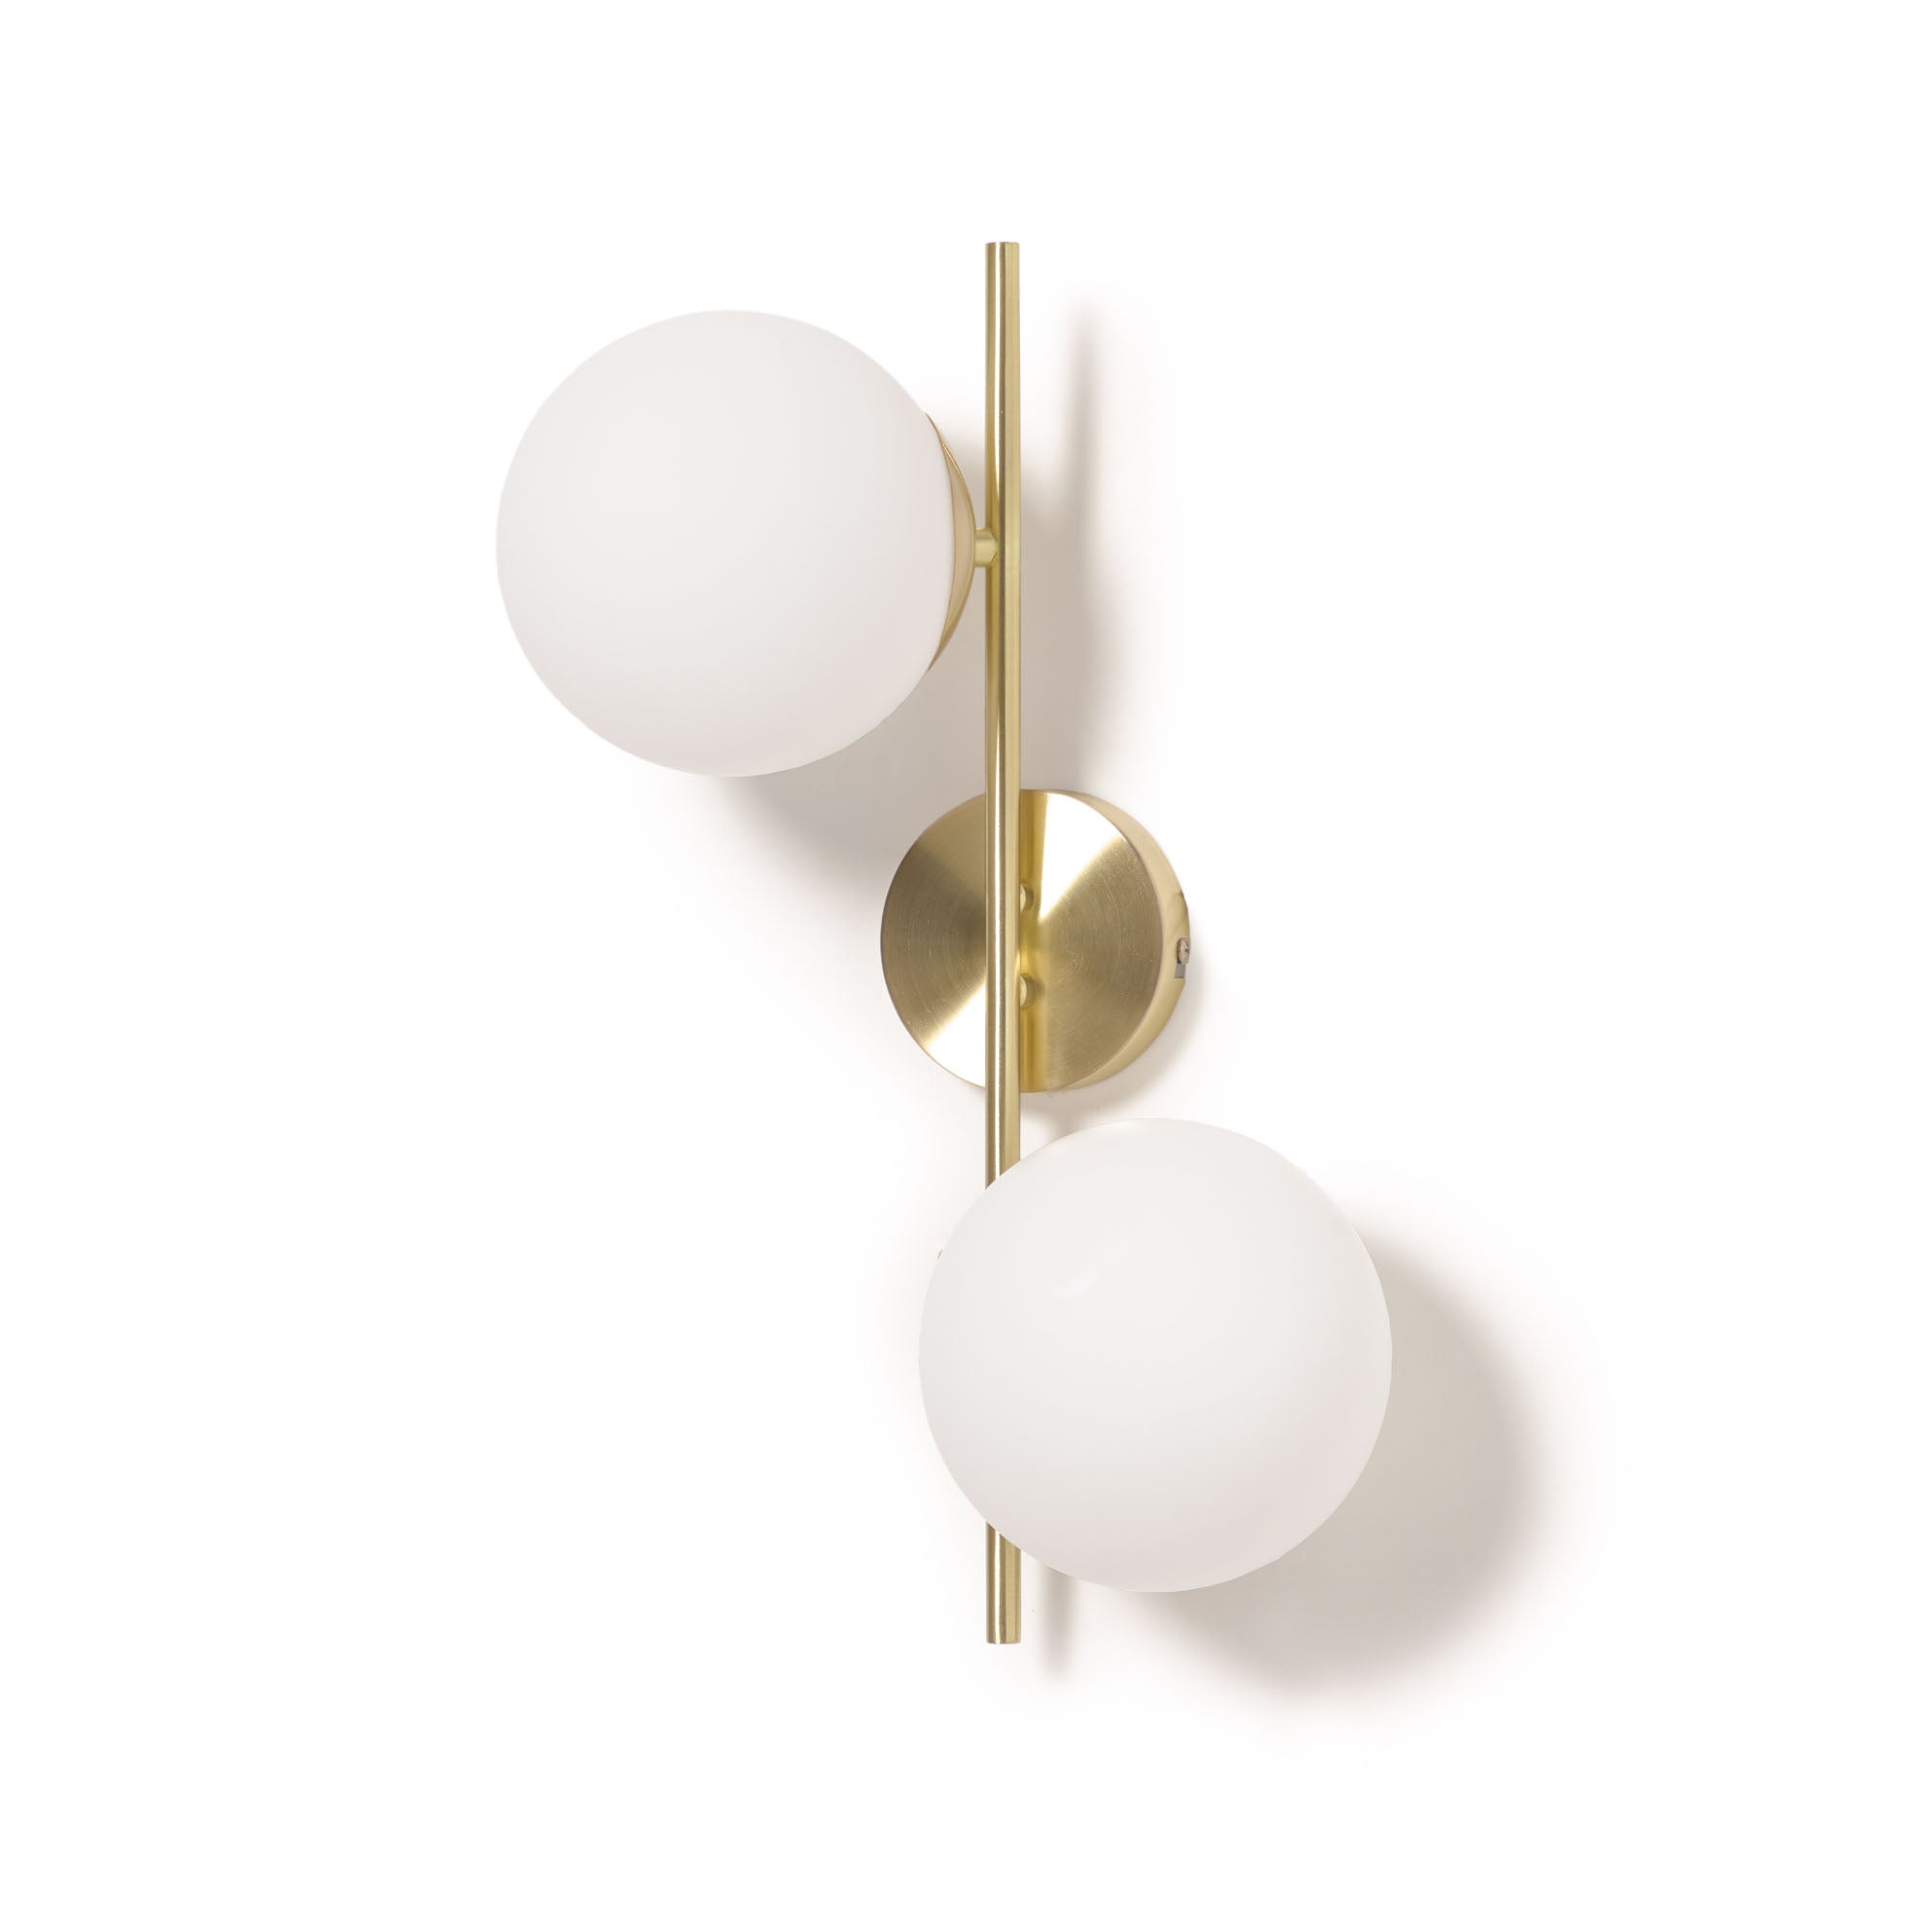 Mahala steel wall light with brass finish and two frosted glass spheres